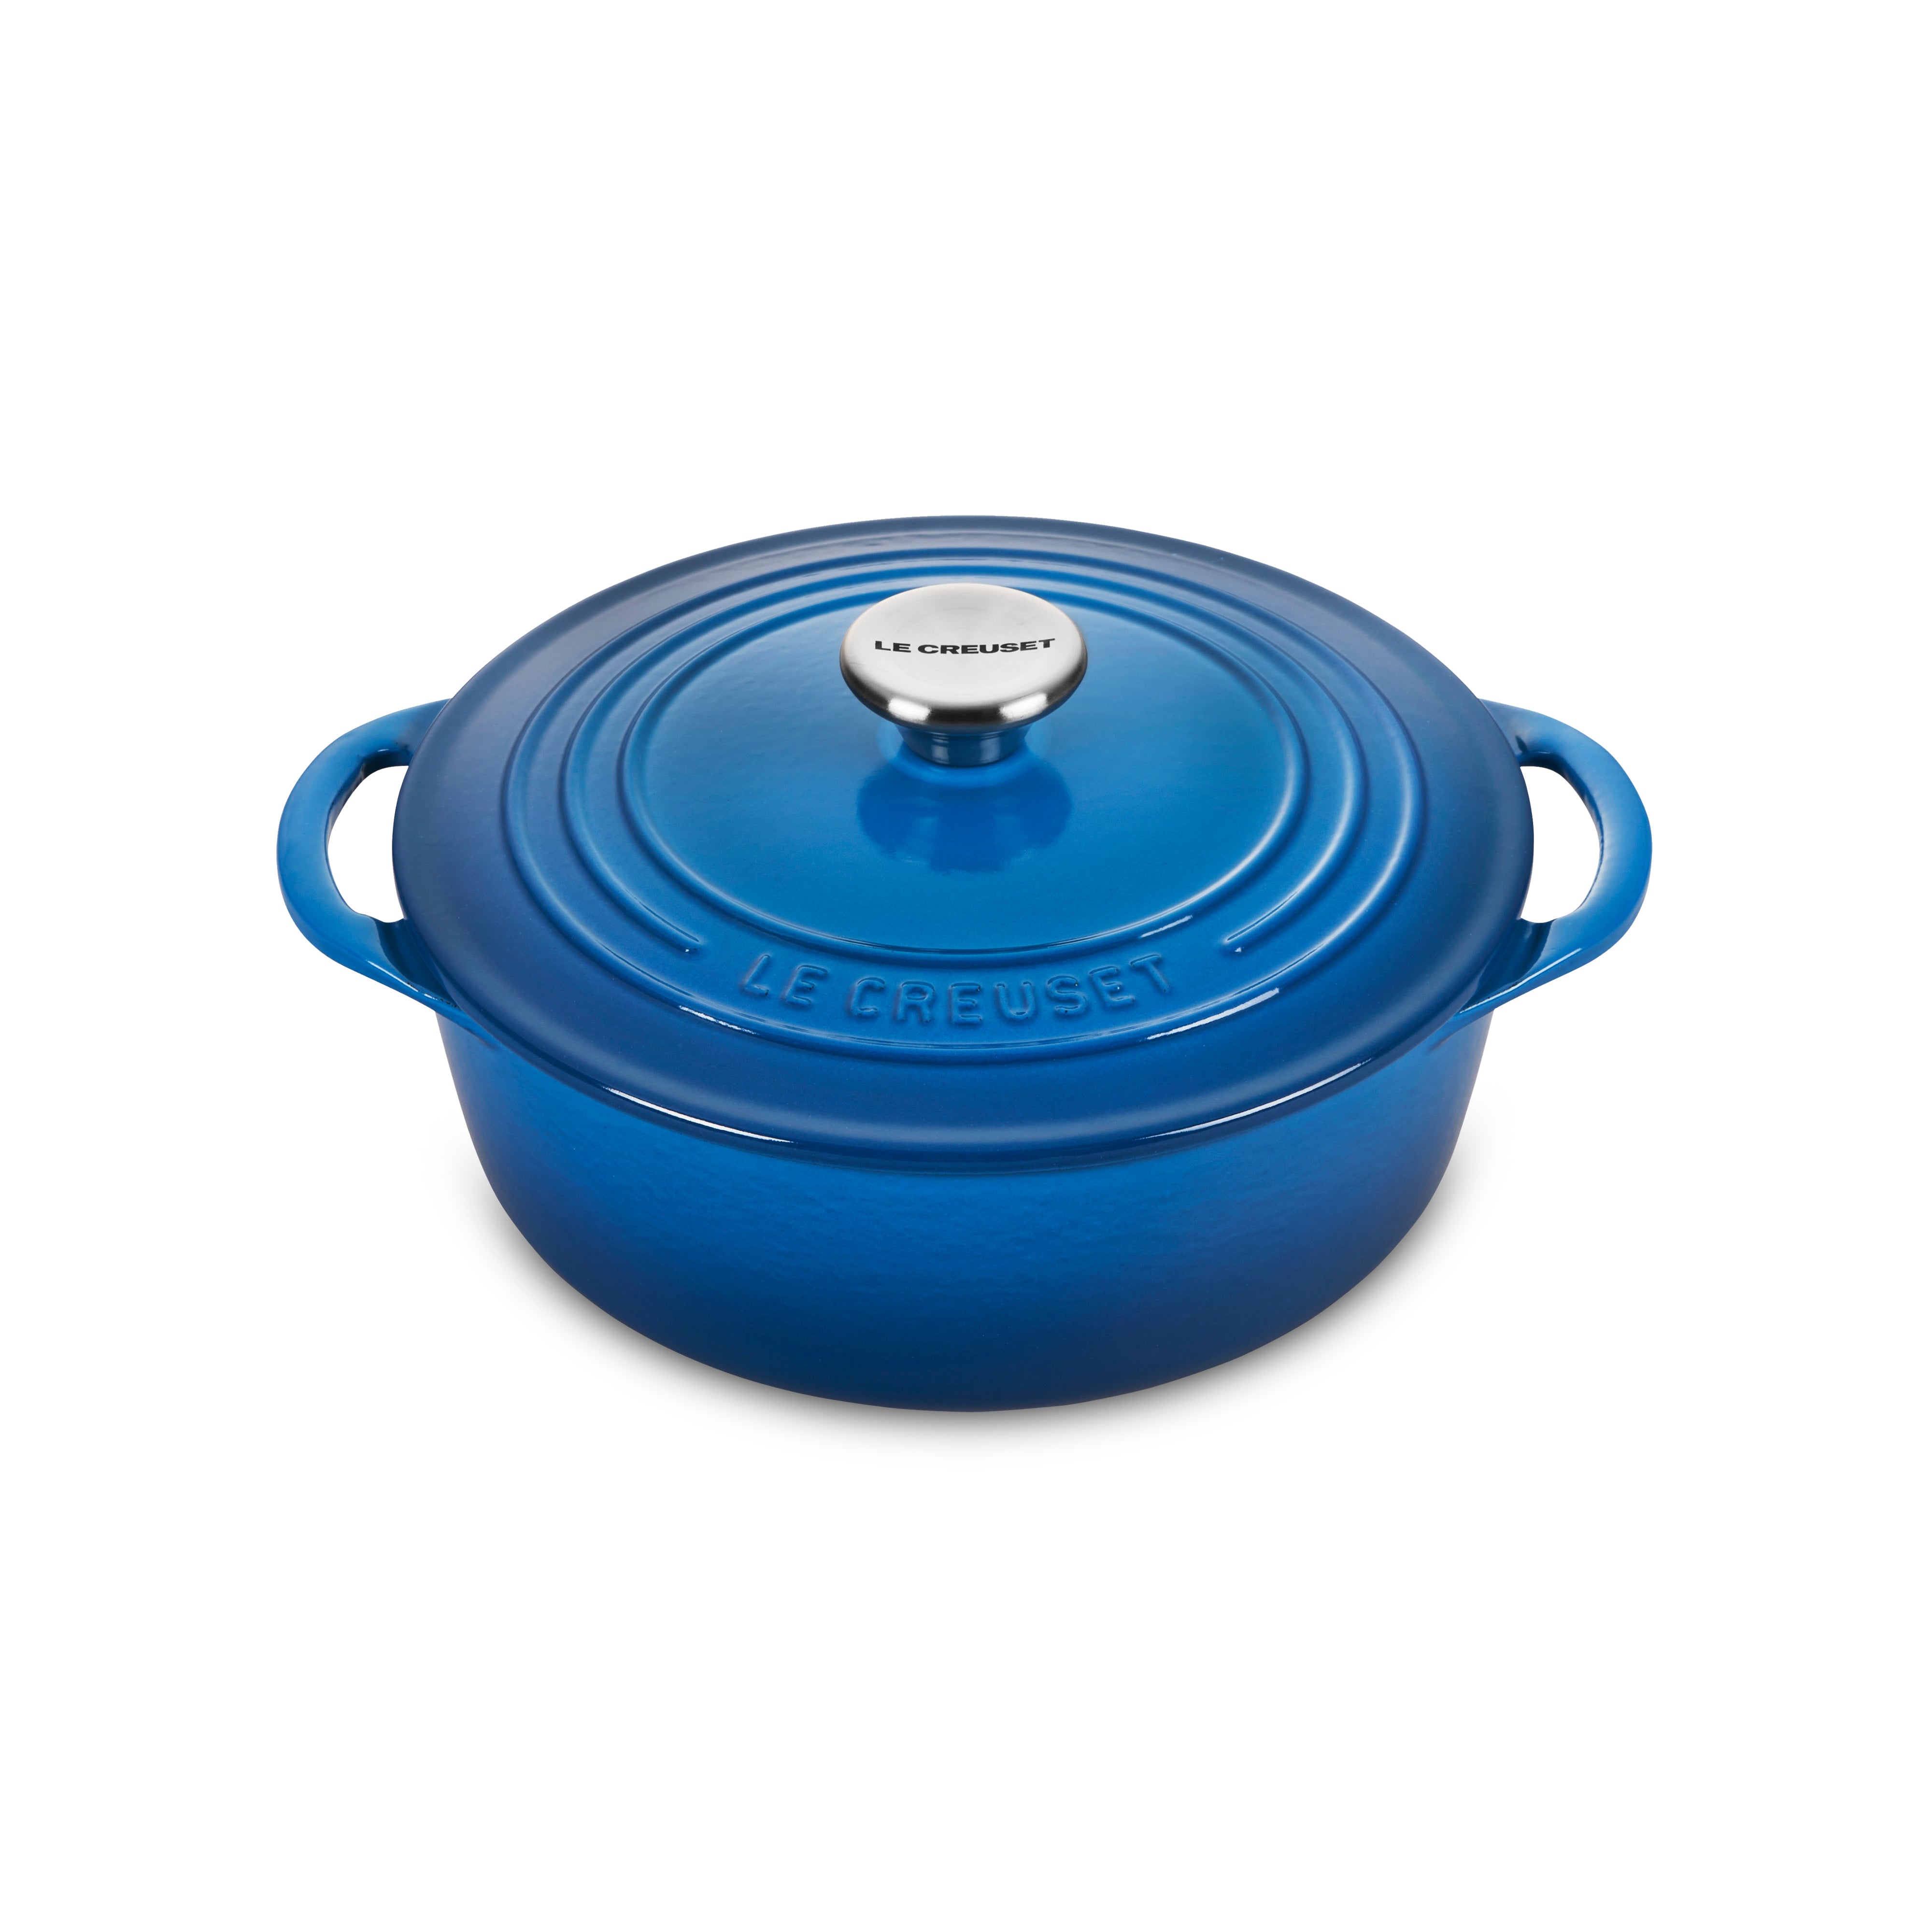 How to Clean Le Creuset Dutch Ovens and Other Enameled Cast Iron